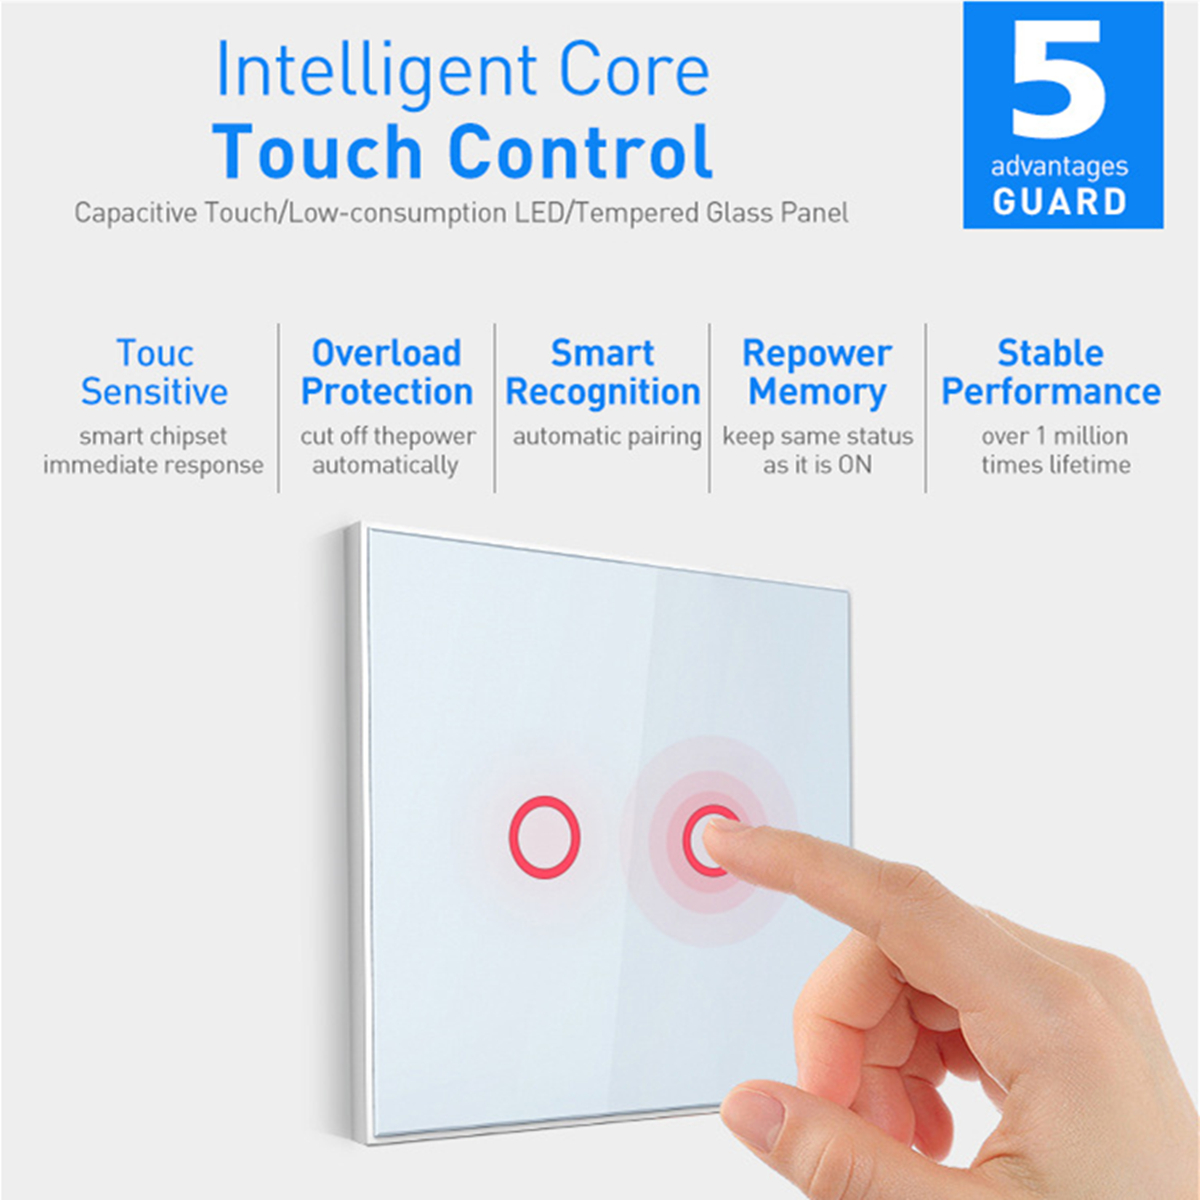 Coolcam Z-Wave Light Switch EU 2 Gang Smart Switch Sensitive Touch Light Switch Compatible with Z-wave 